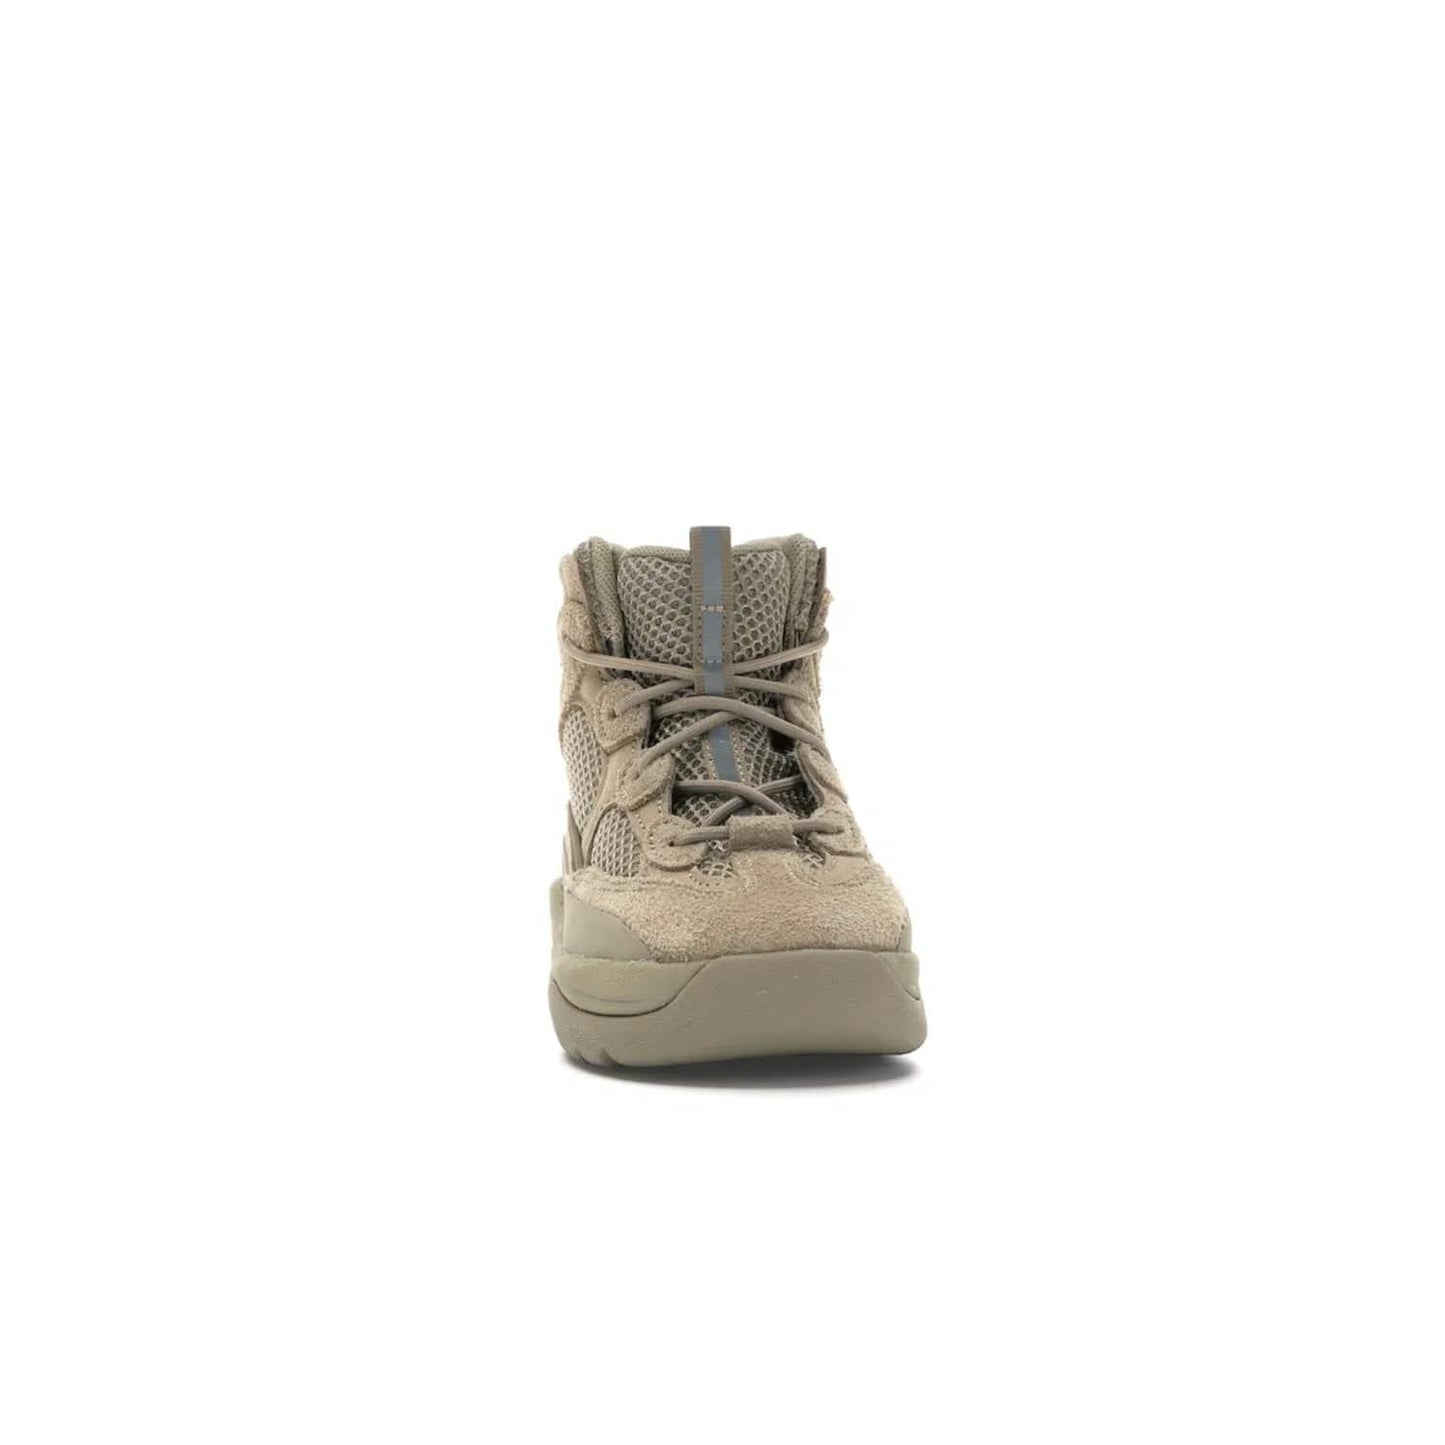 adidas Yeezy Desert Boot Rock (Kids) - Image 9 - Only at www.BallersClubKickz.com - Elevate your style this season with the adidas Yeezy Desert Boot Rock. Crafted from layered nylon and suede, this chic kids' silhouette features an EVA midsole and rubber outsole for superior cushioning and traction.